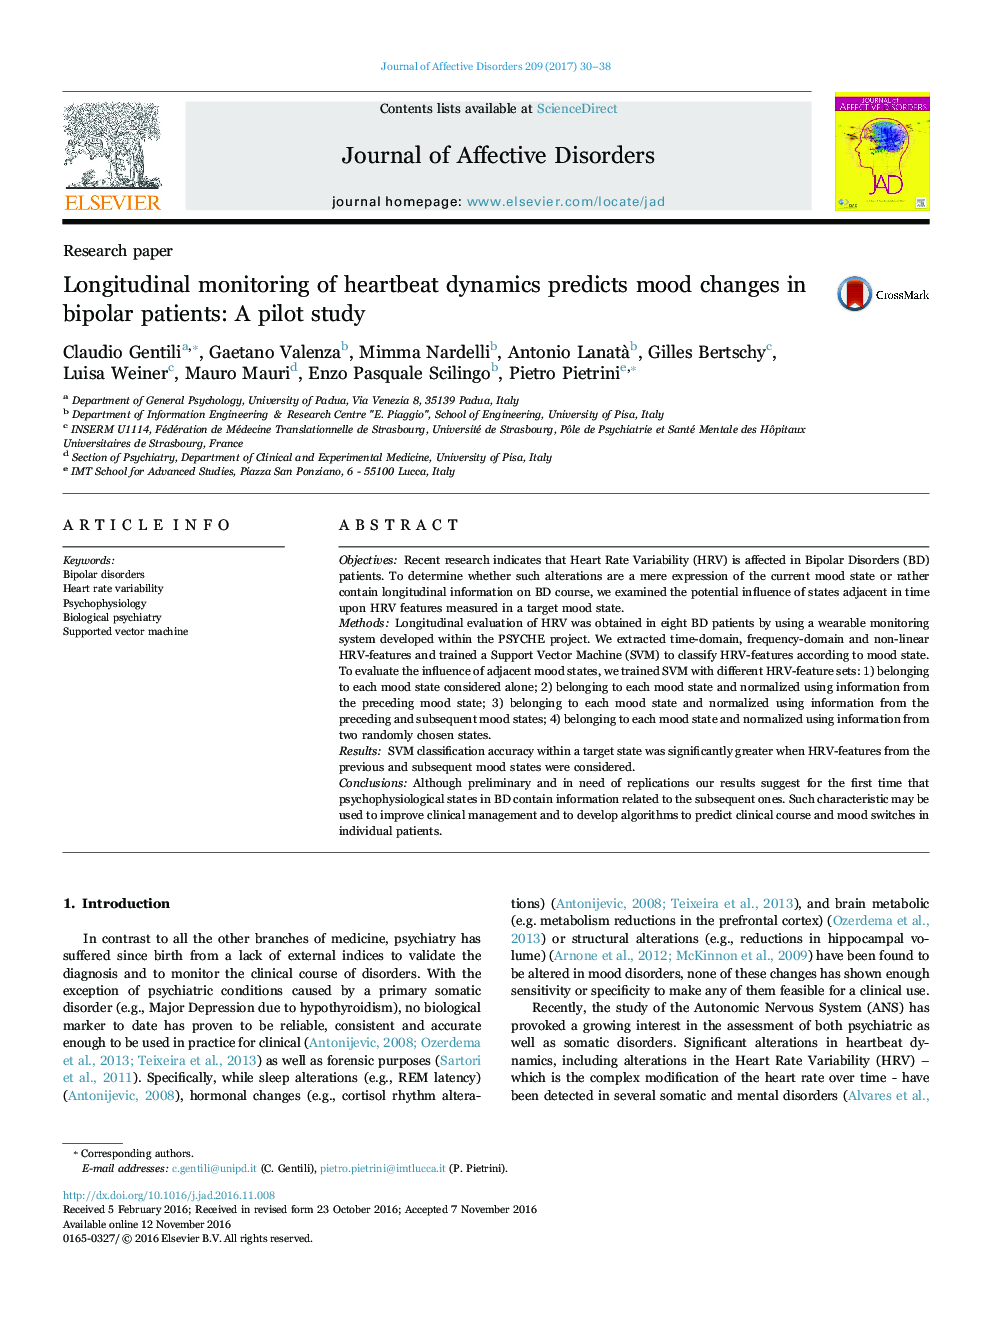 Research paperLongitudinal monitoring of heartbeat dynamics predicts mood changes in bipolar patients: A pilot study